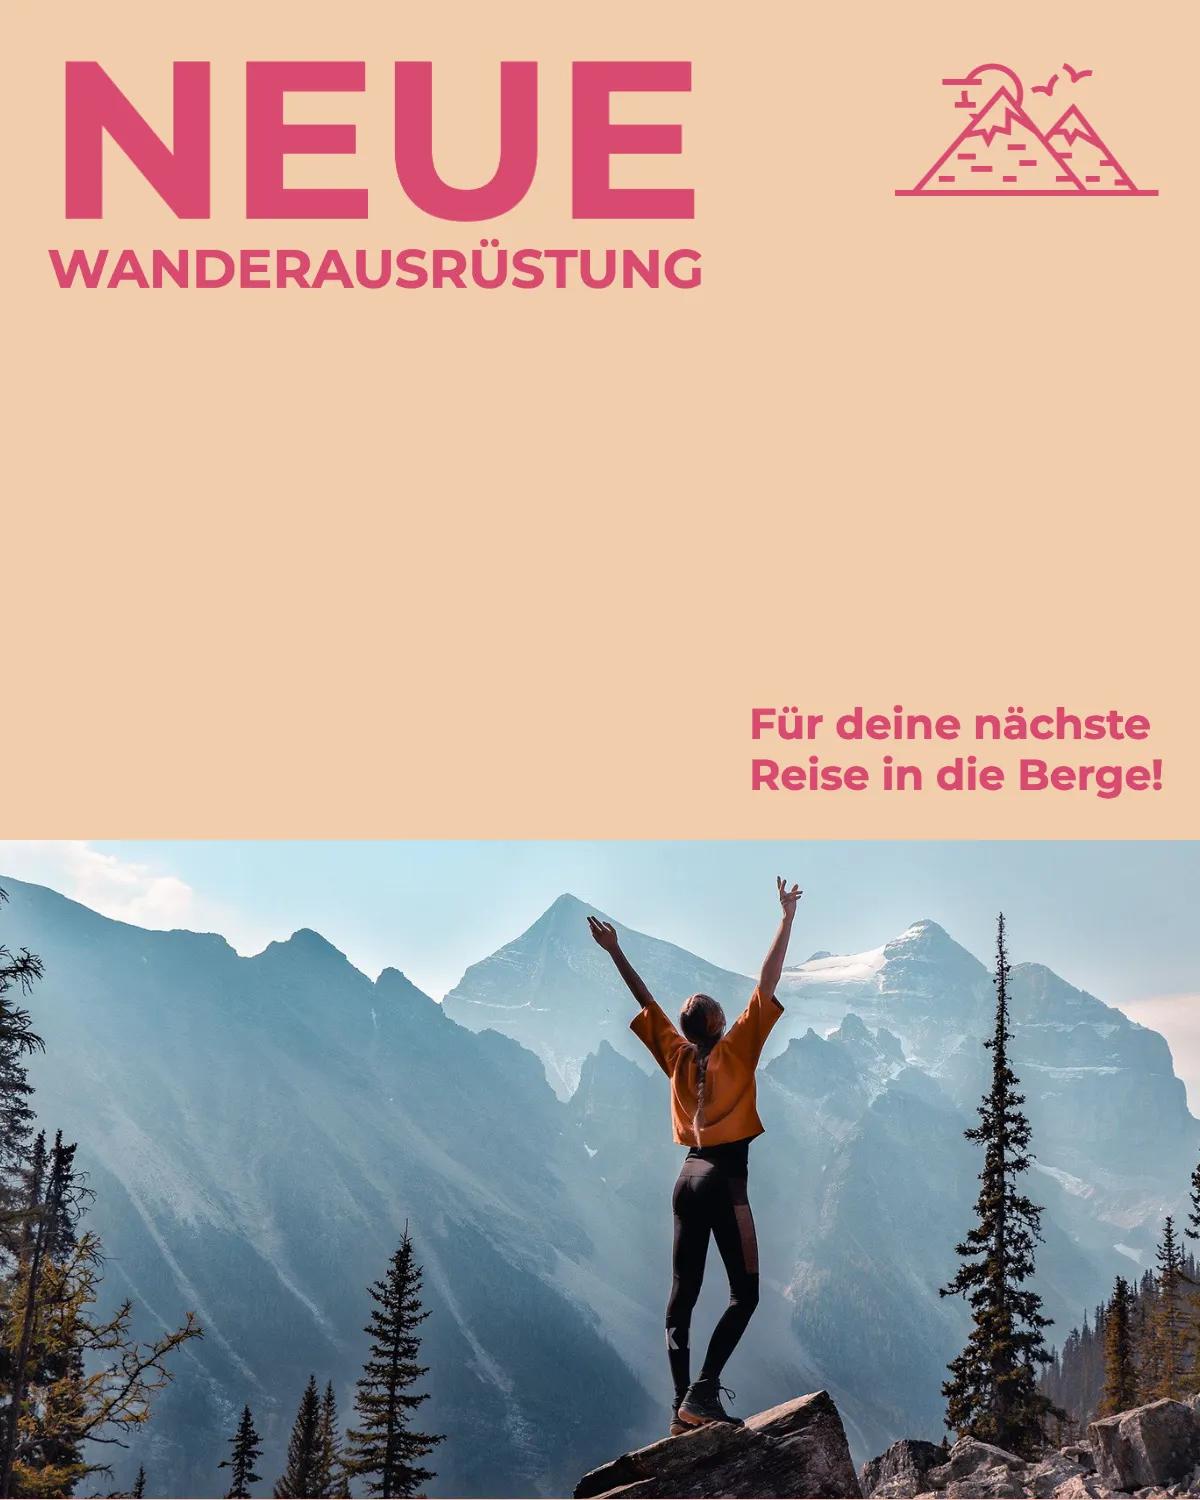 Pink Hiking Supply Store Instagram Ad